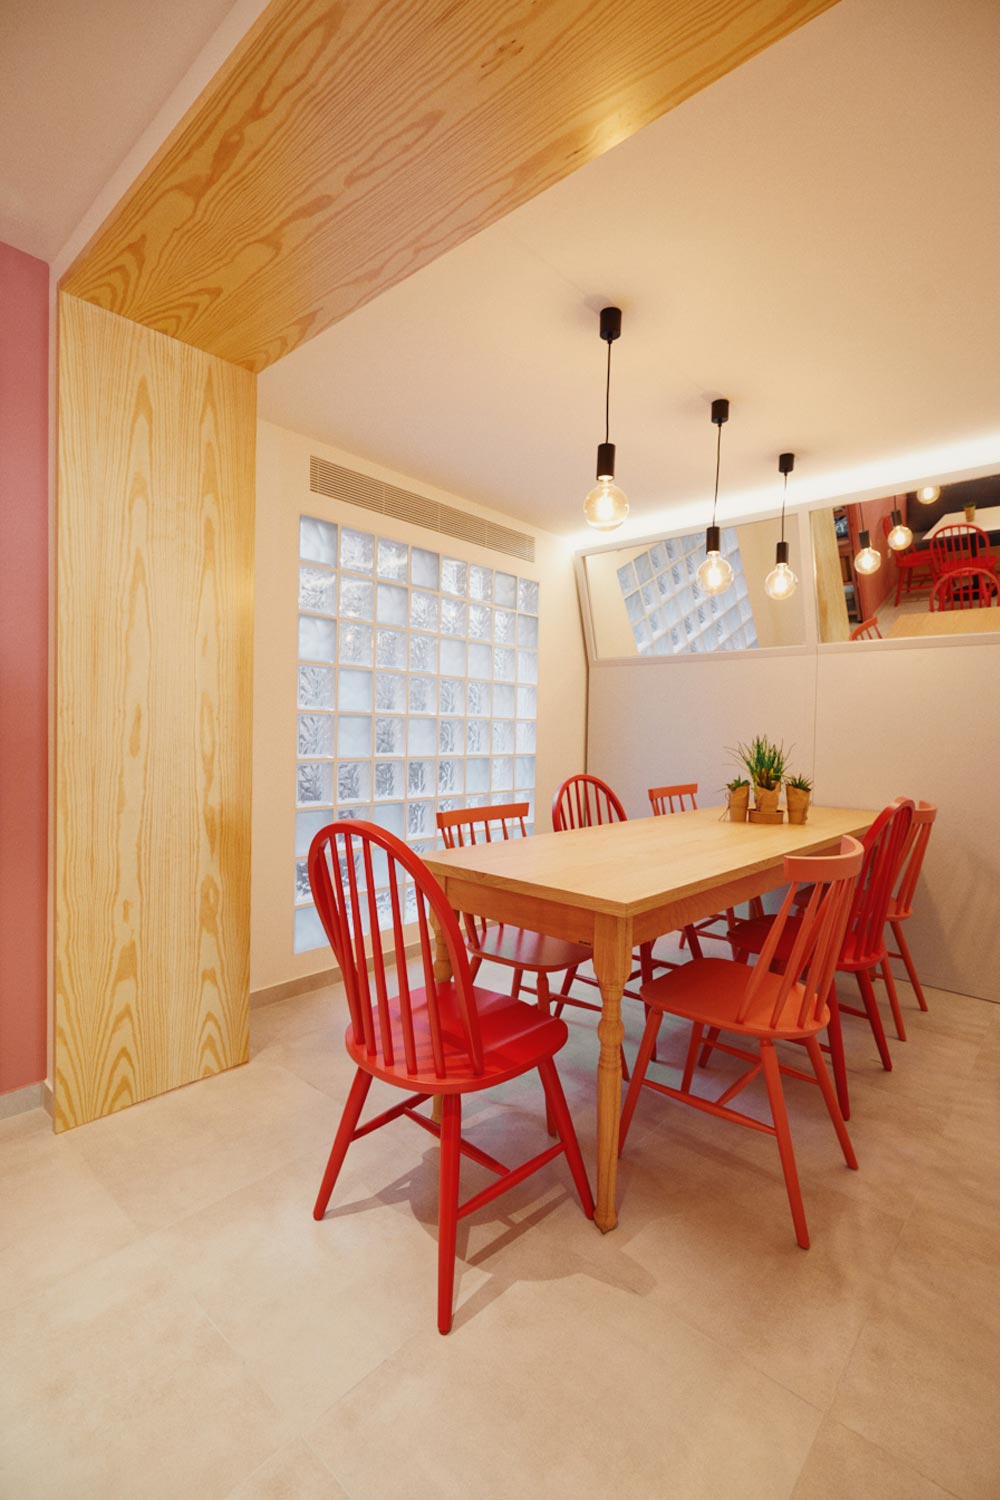 Brunch shop interior, view of the dining area with wooden table, red chairs and a mirror structure.